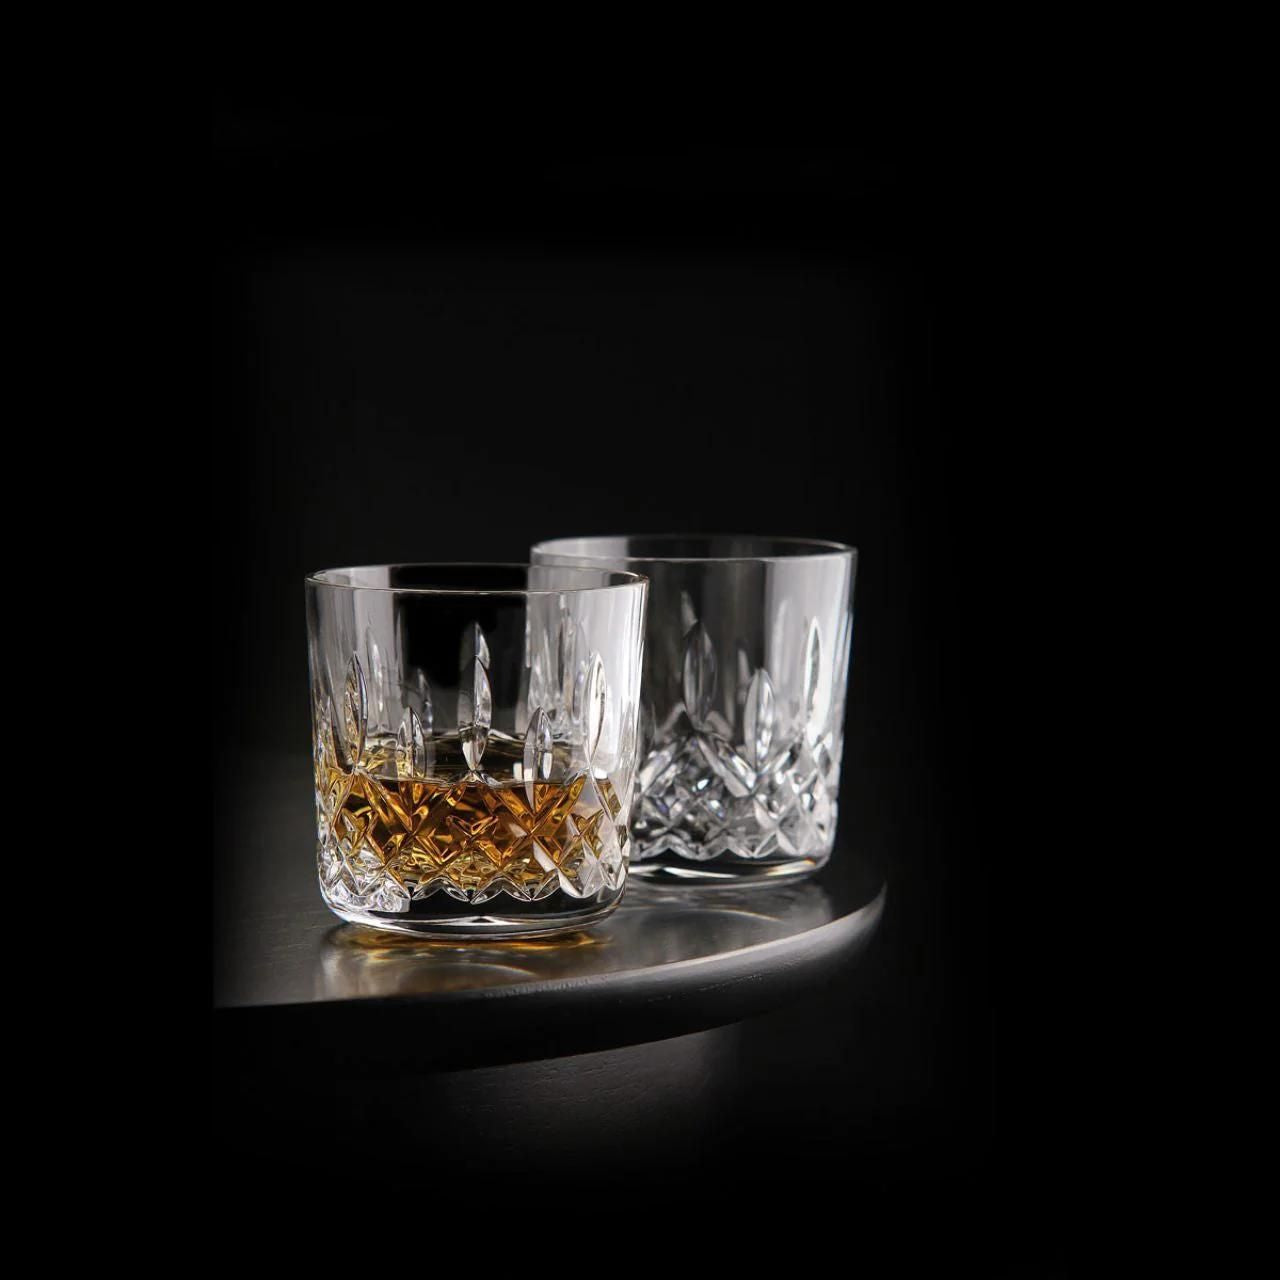 Giftology Lismore Tumbler Set of 2 by Waterford Crystal   Packaged as a pair and providing a timeless gift for whiskey lovers are these popular Lismore Tumblers. Beautifully embellished with our distinguished Lismore pattern, these classic crystal tumblers provide the perfect serve for whiskey, brandy or bourbon, elevating a casual tipple into a luxurious occasion. 